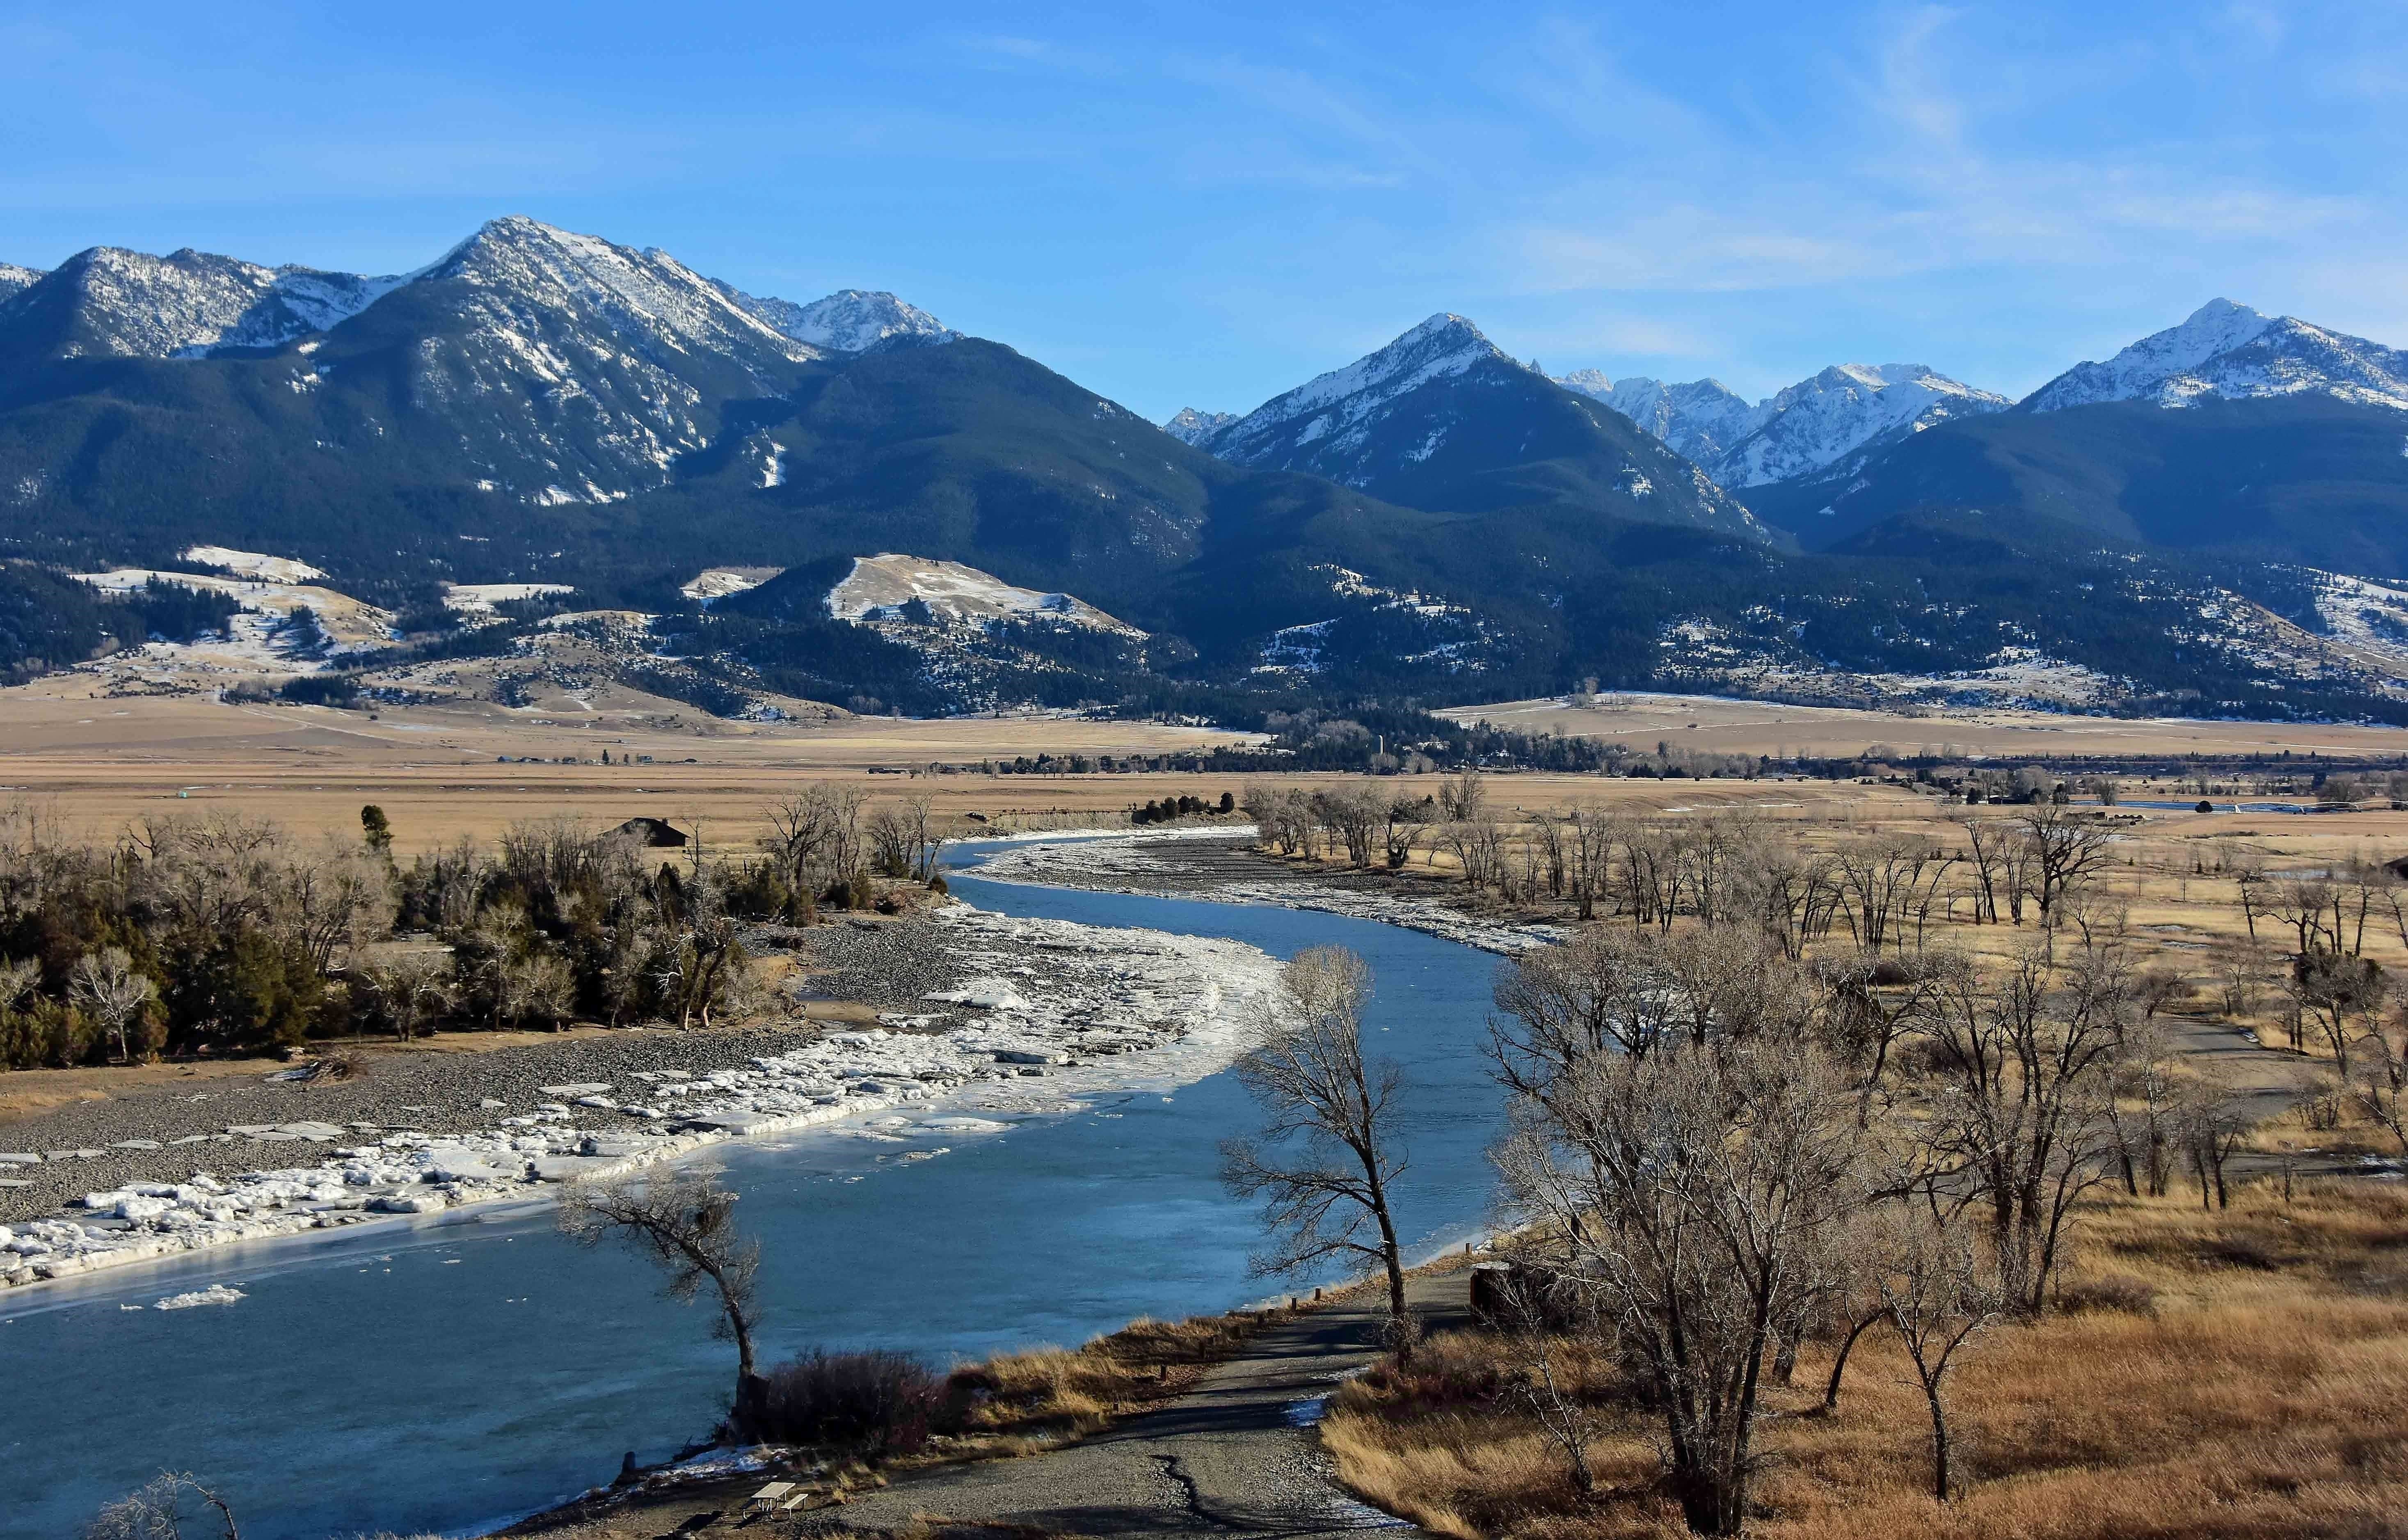 A scenic winter landscape on a sunny day at mallard's rest fishing access along the paradise valley scenic loop of the yellowstone river and gallatin range, south of livingston, montana